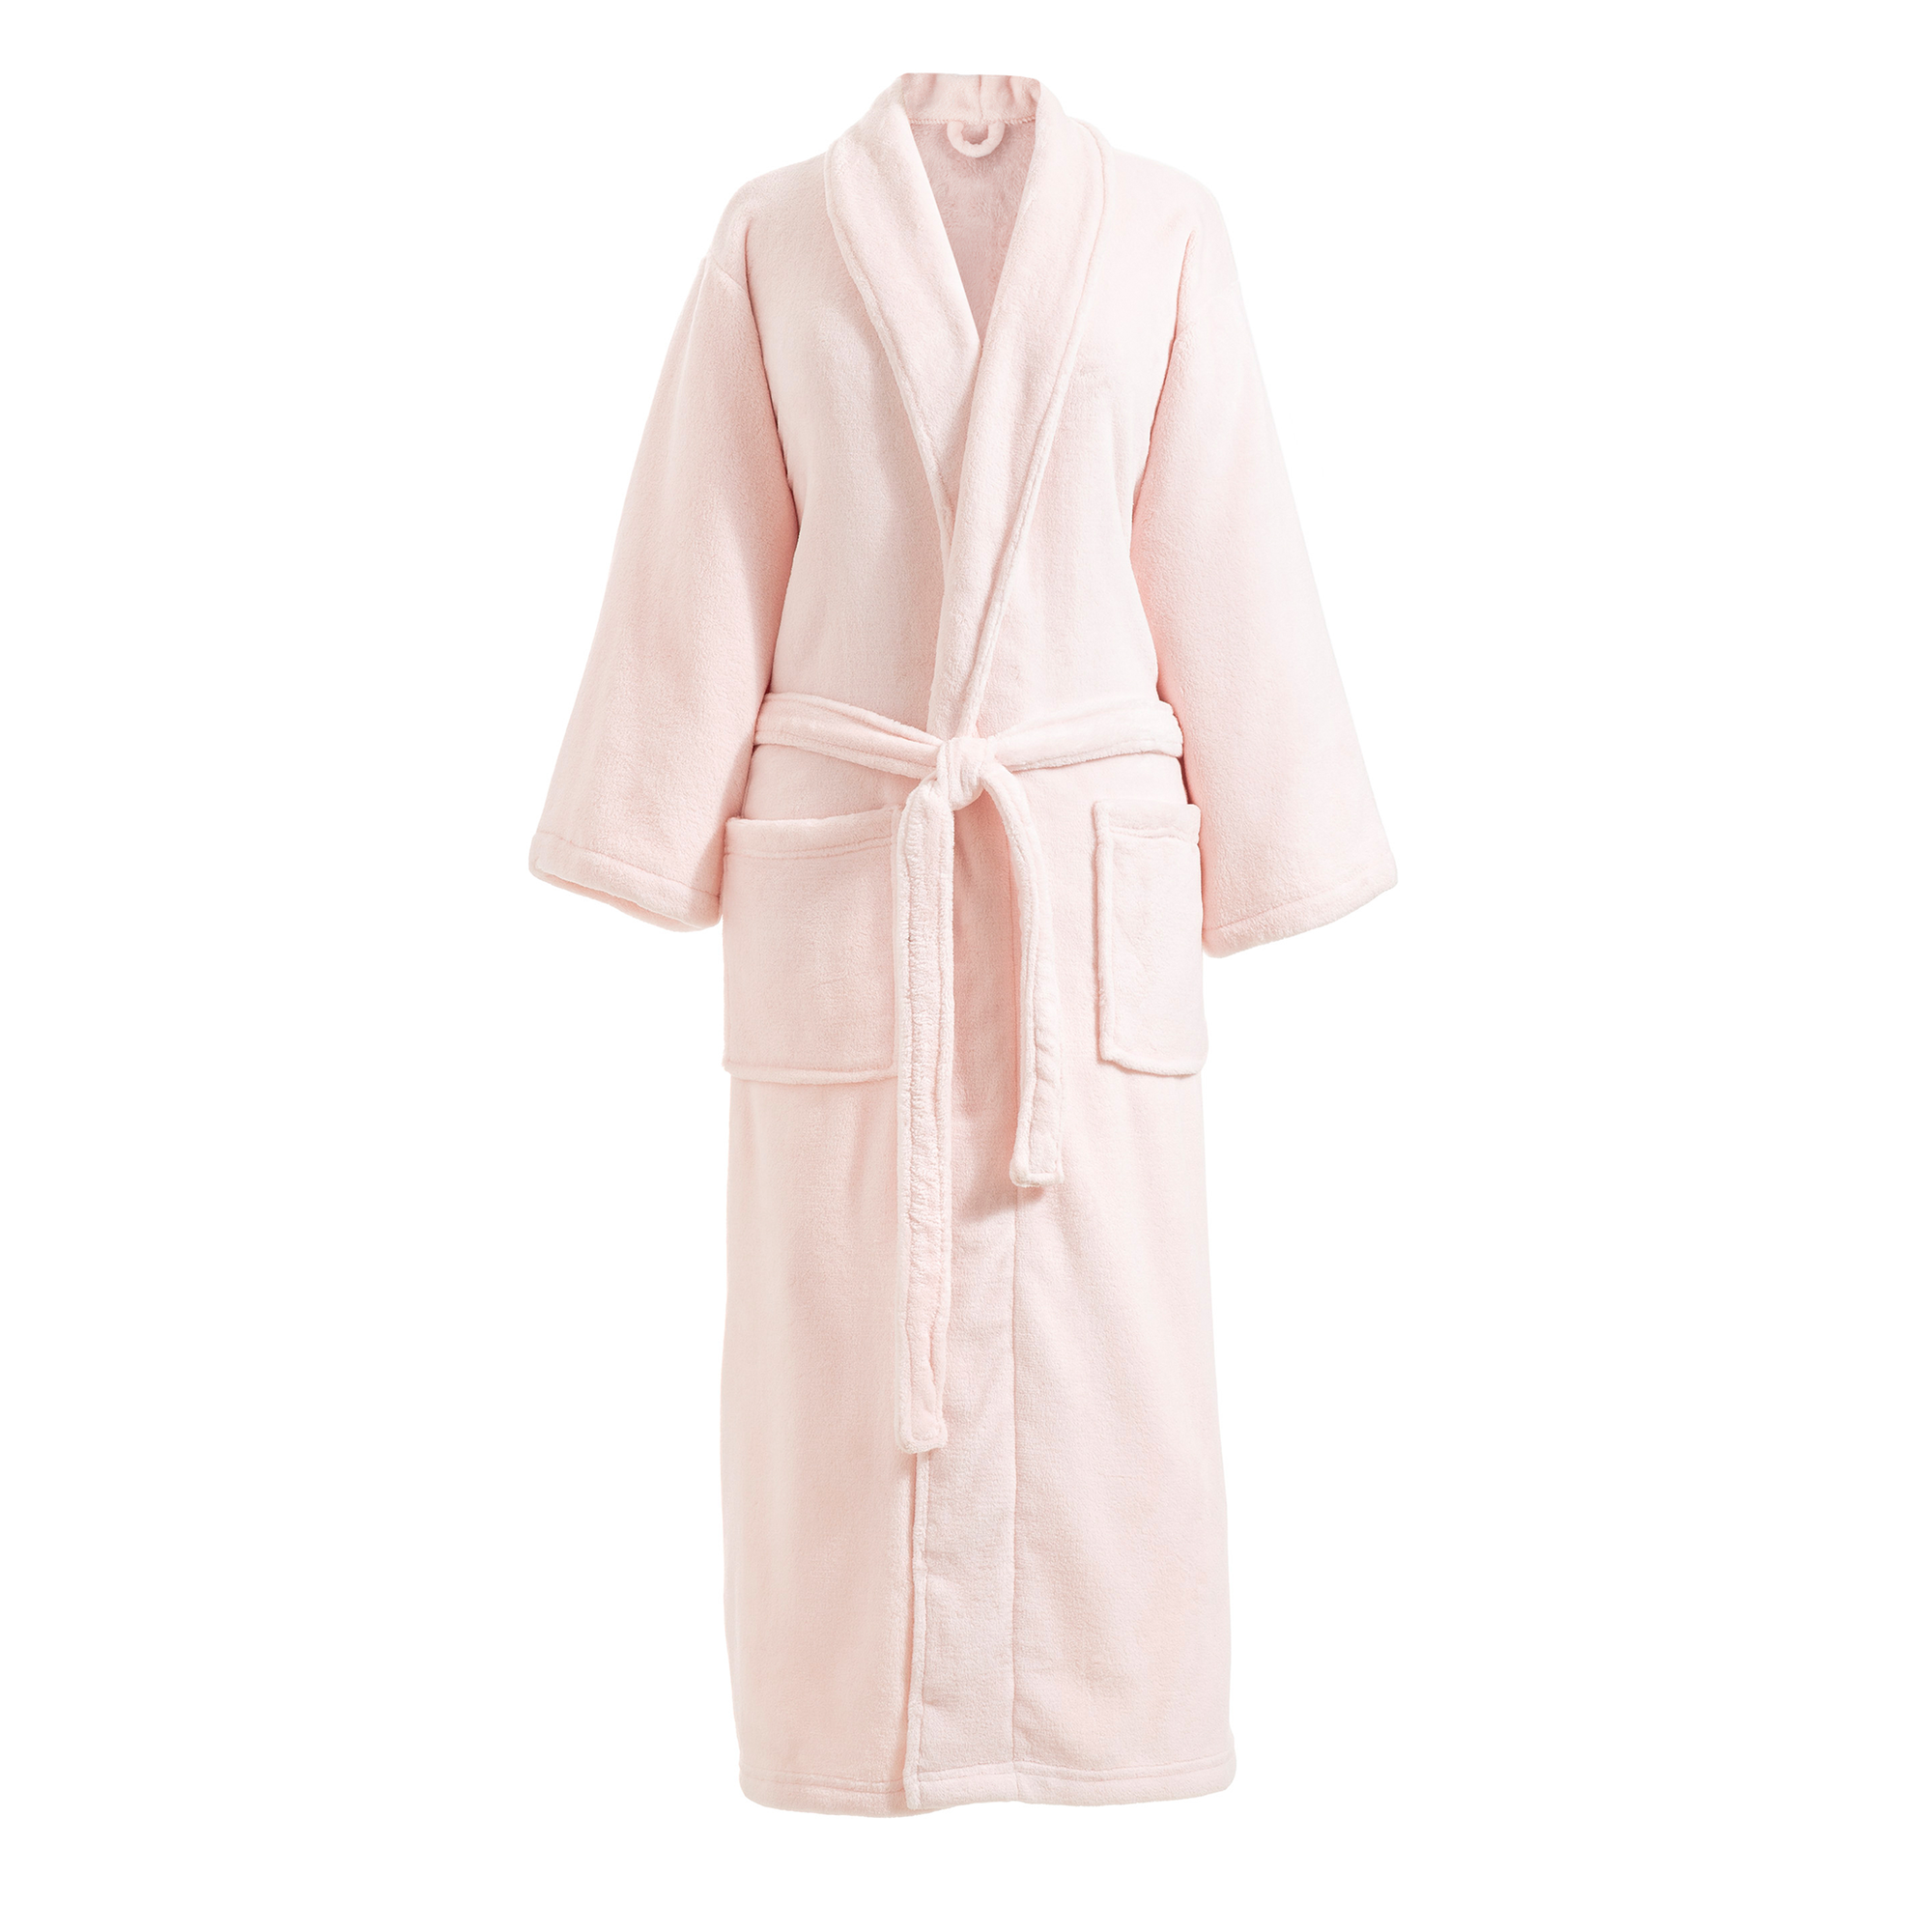 Whole Image of Pine Cone Hill Sheepy Fleece 2.0 Robe in Pale Rose Color